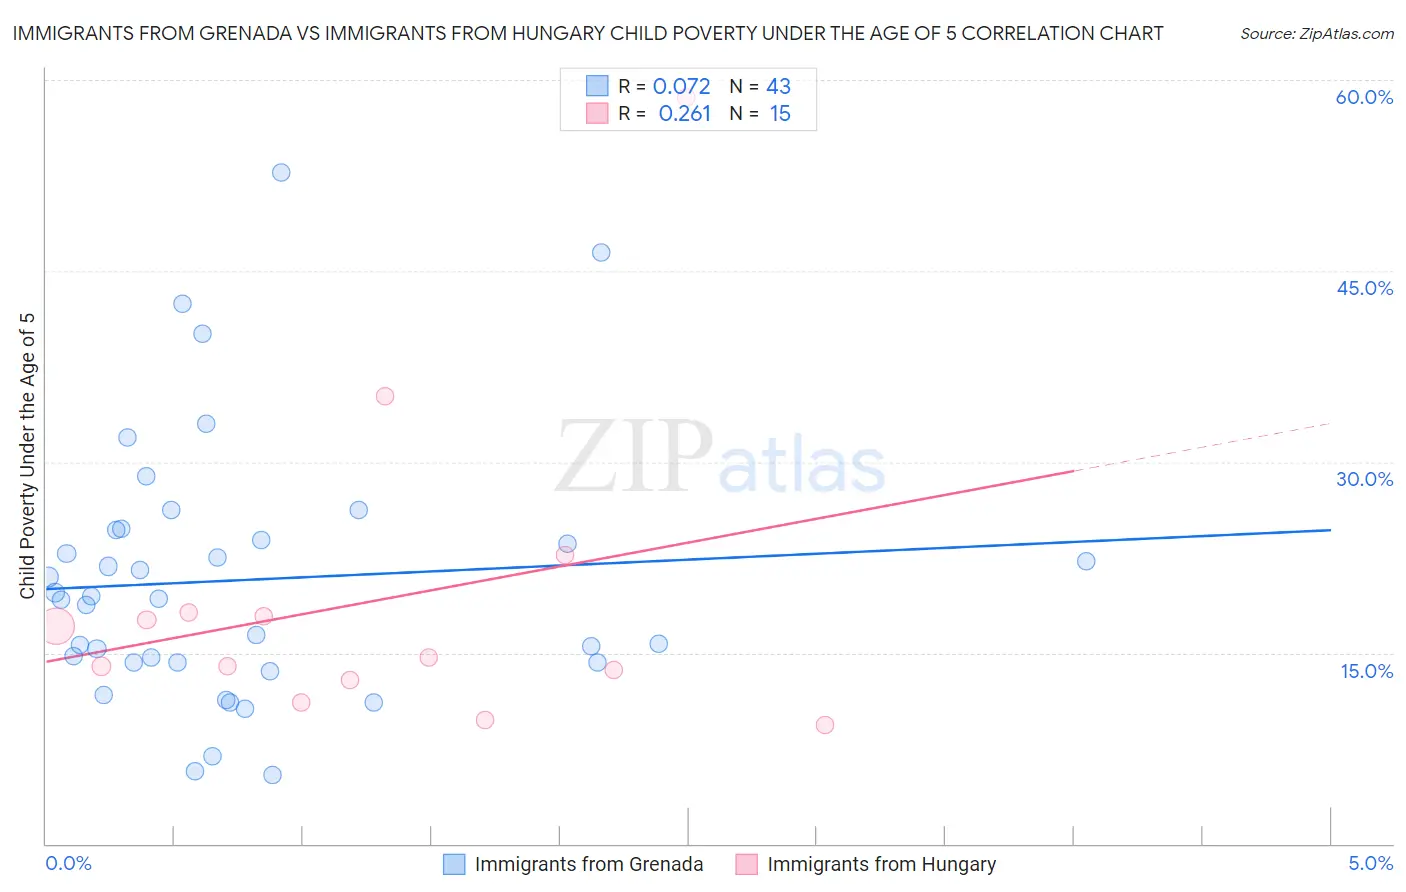 Immigrants from Grenada vs Immigrants from Hungary Child Poverty Under the Age of 5